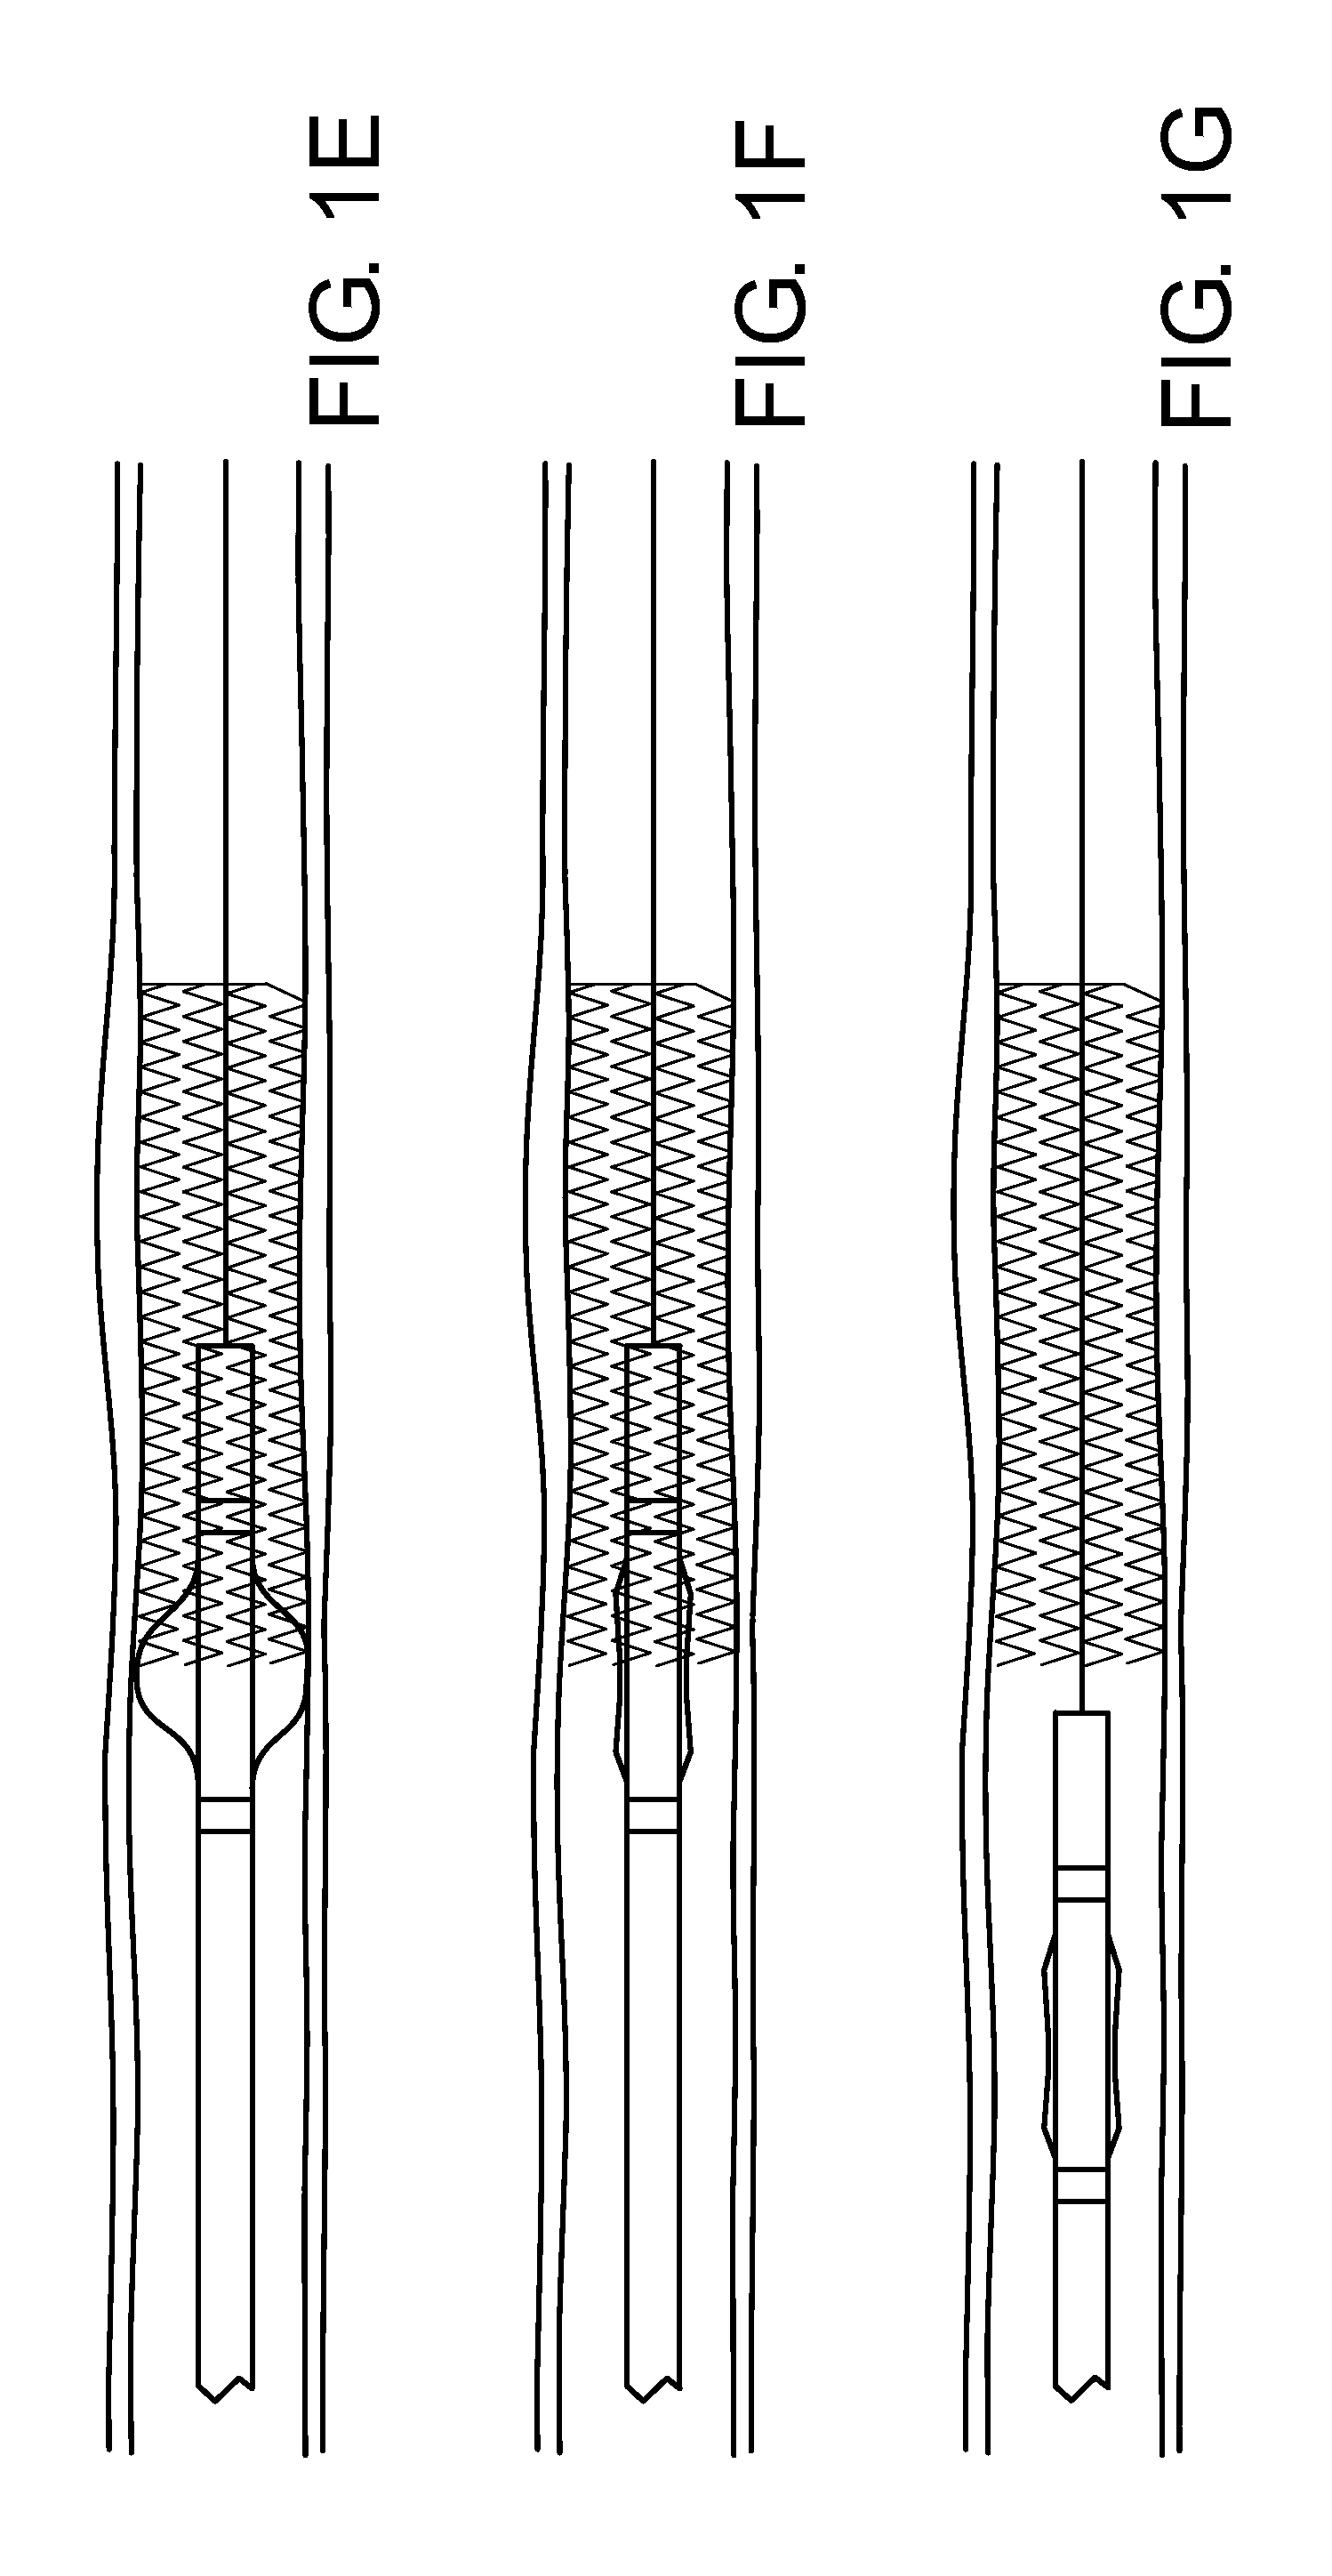 Conformable vascular prosthesis delivery system